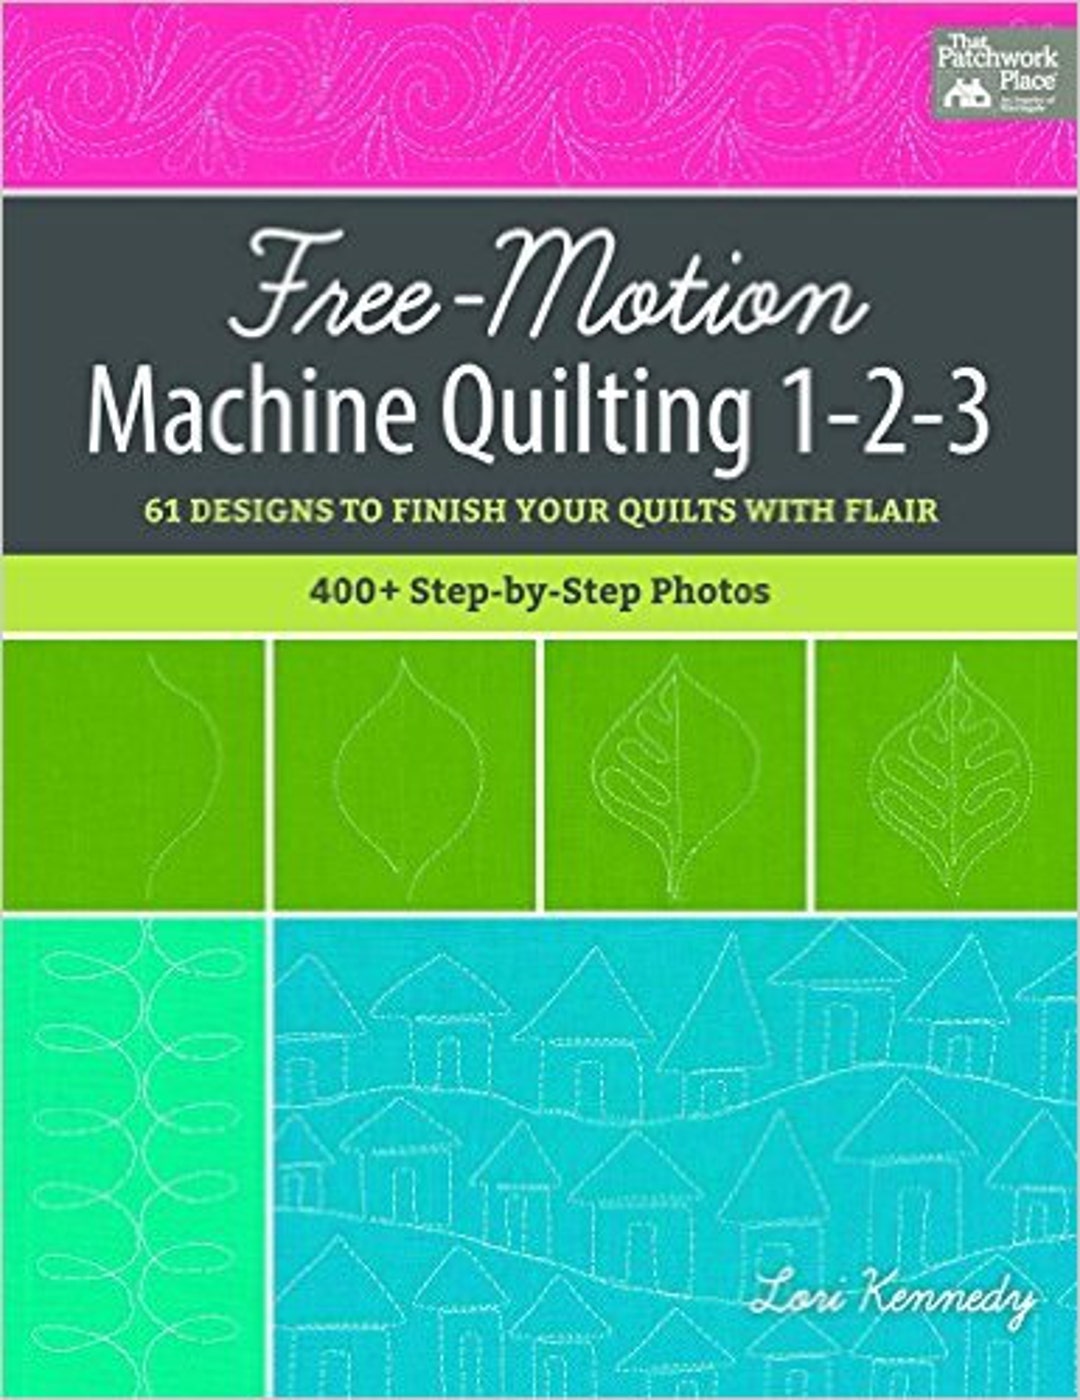 Full Line Stencil - Machine Quilting Guide - Template to Create Block  Designs and Borders for Free Motion Quilting, Domestic Machine Quilting,  Hand